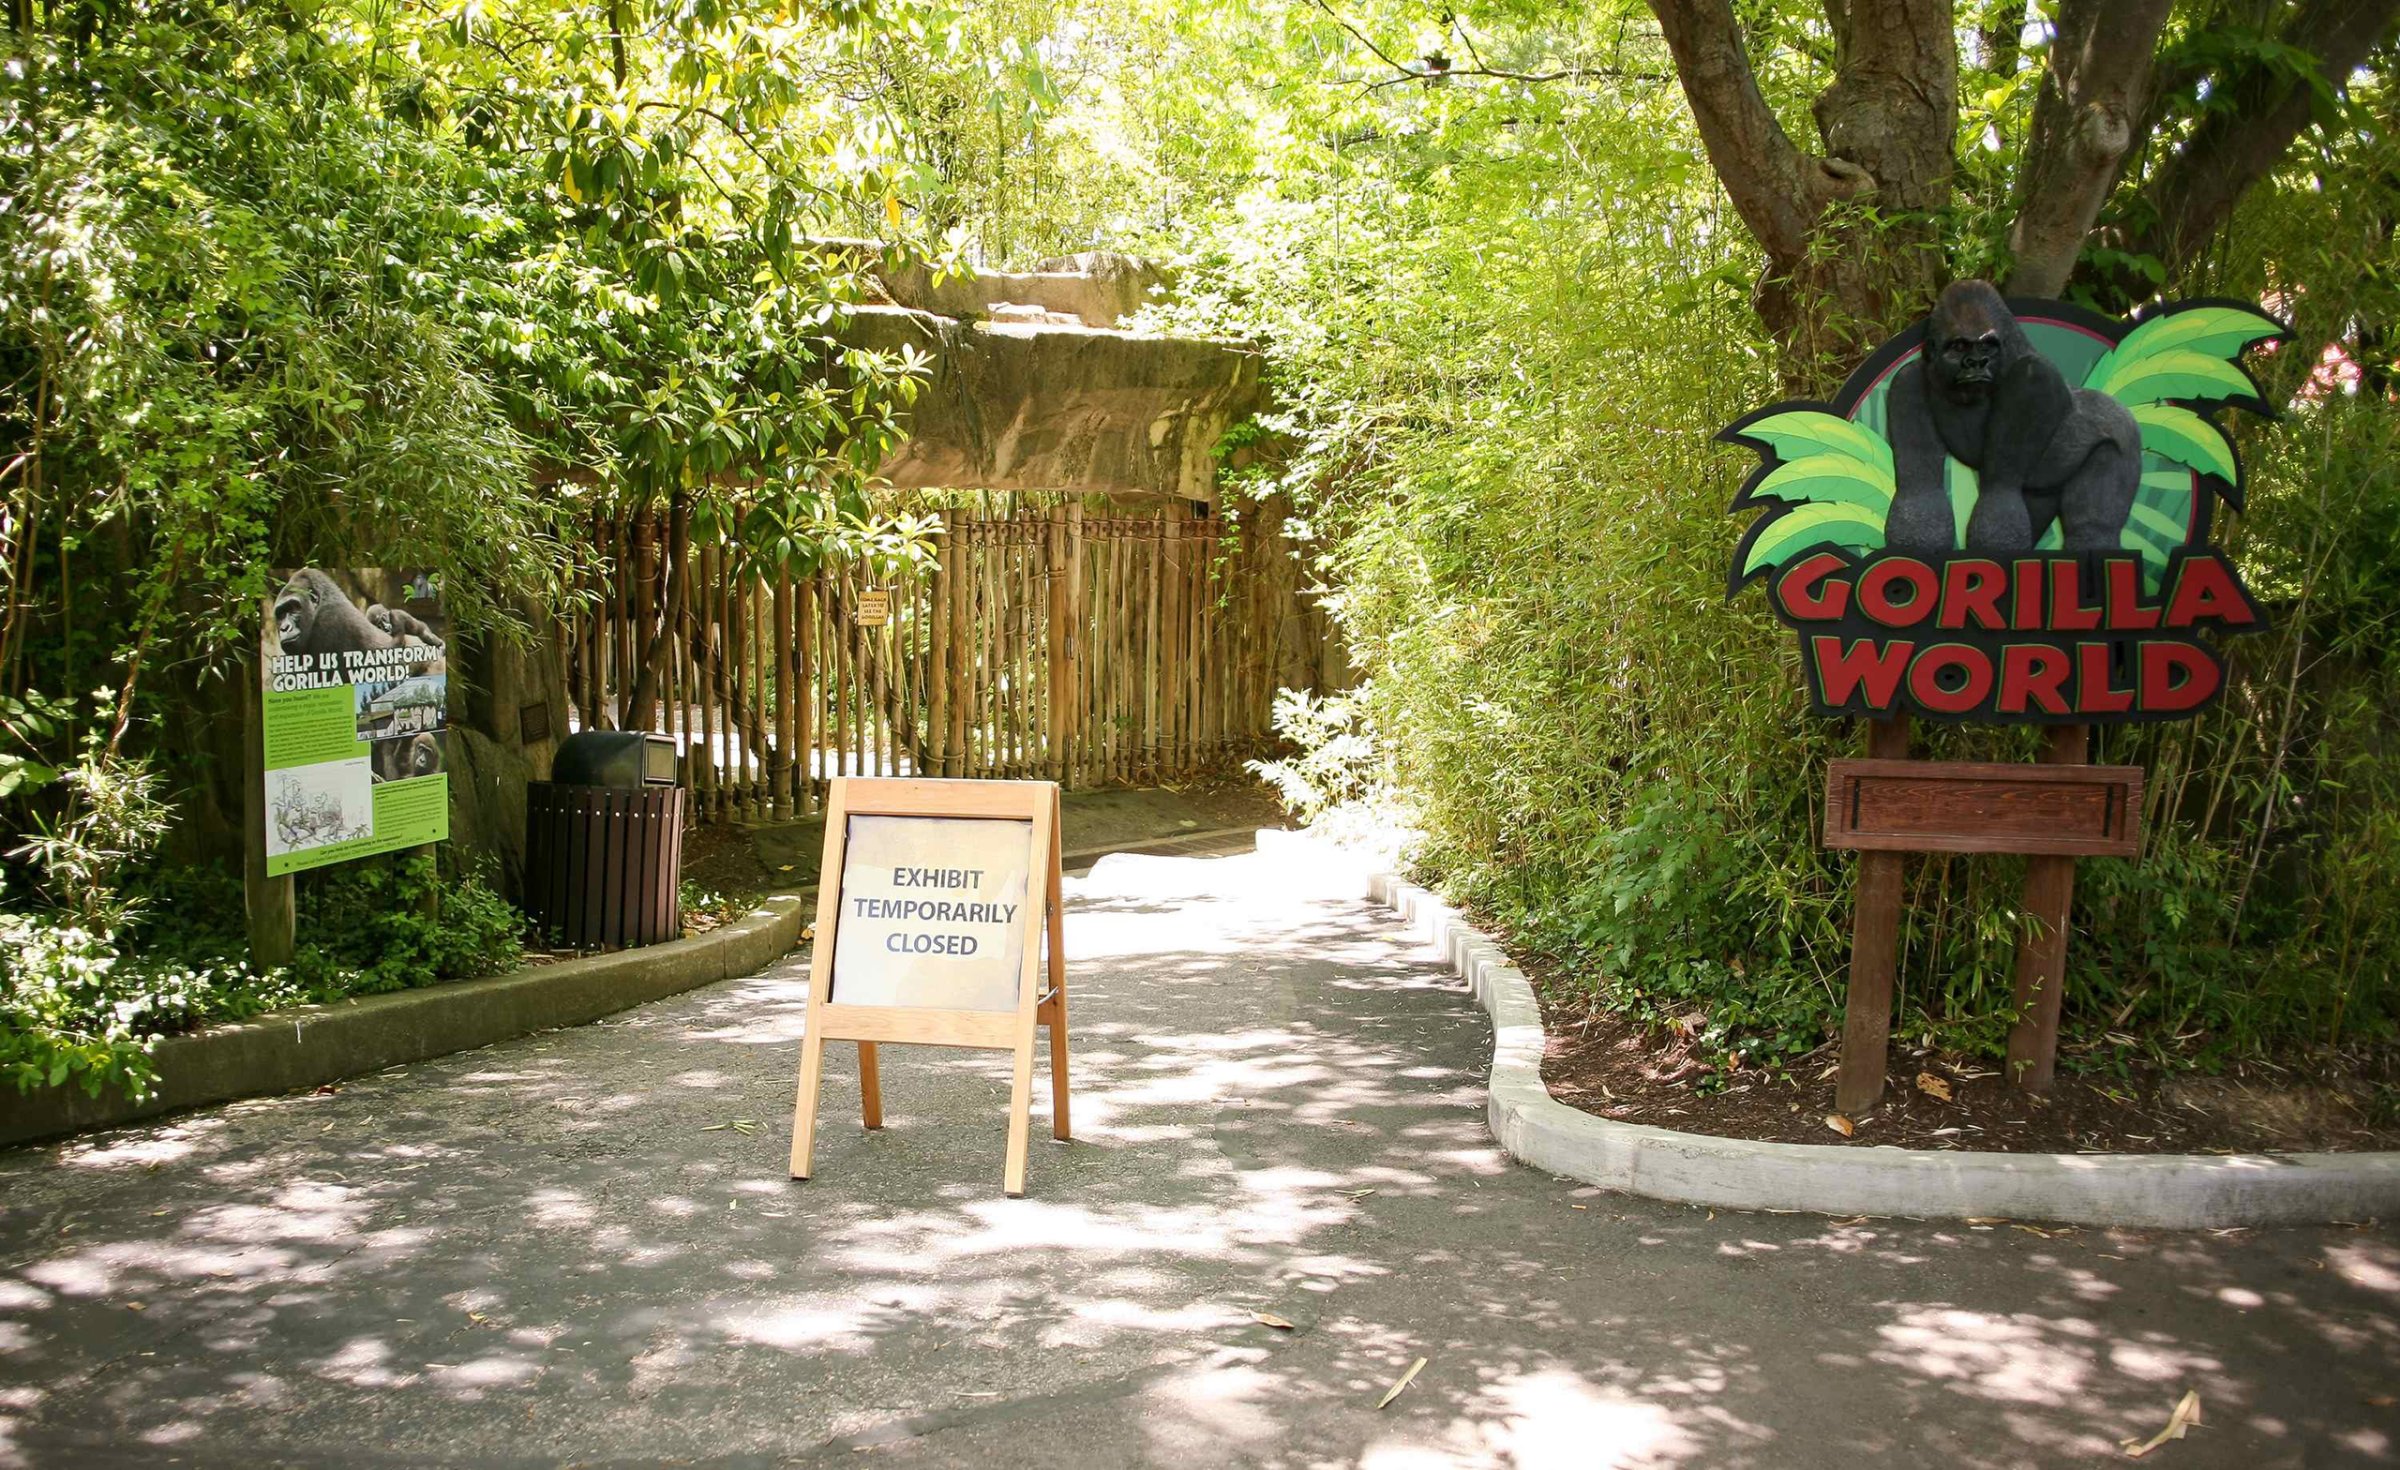 The entrance to the Cincinnati Zoo's Gorilla World exhibit is closed, two days after a boy tumbled into its moat and officials were forced to kill Harambe, a Western lowland gorilla, in Cincinnati, Ohio, on May 30, 2016.